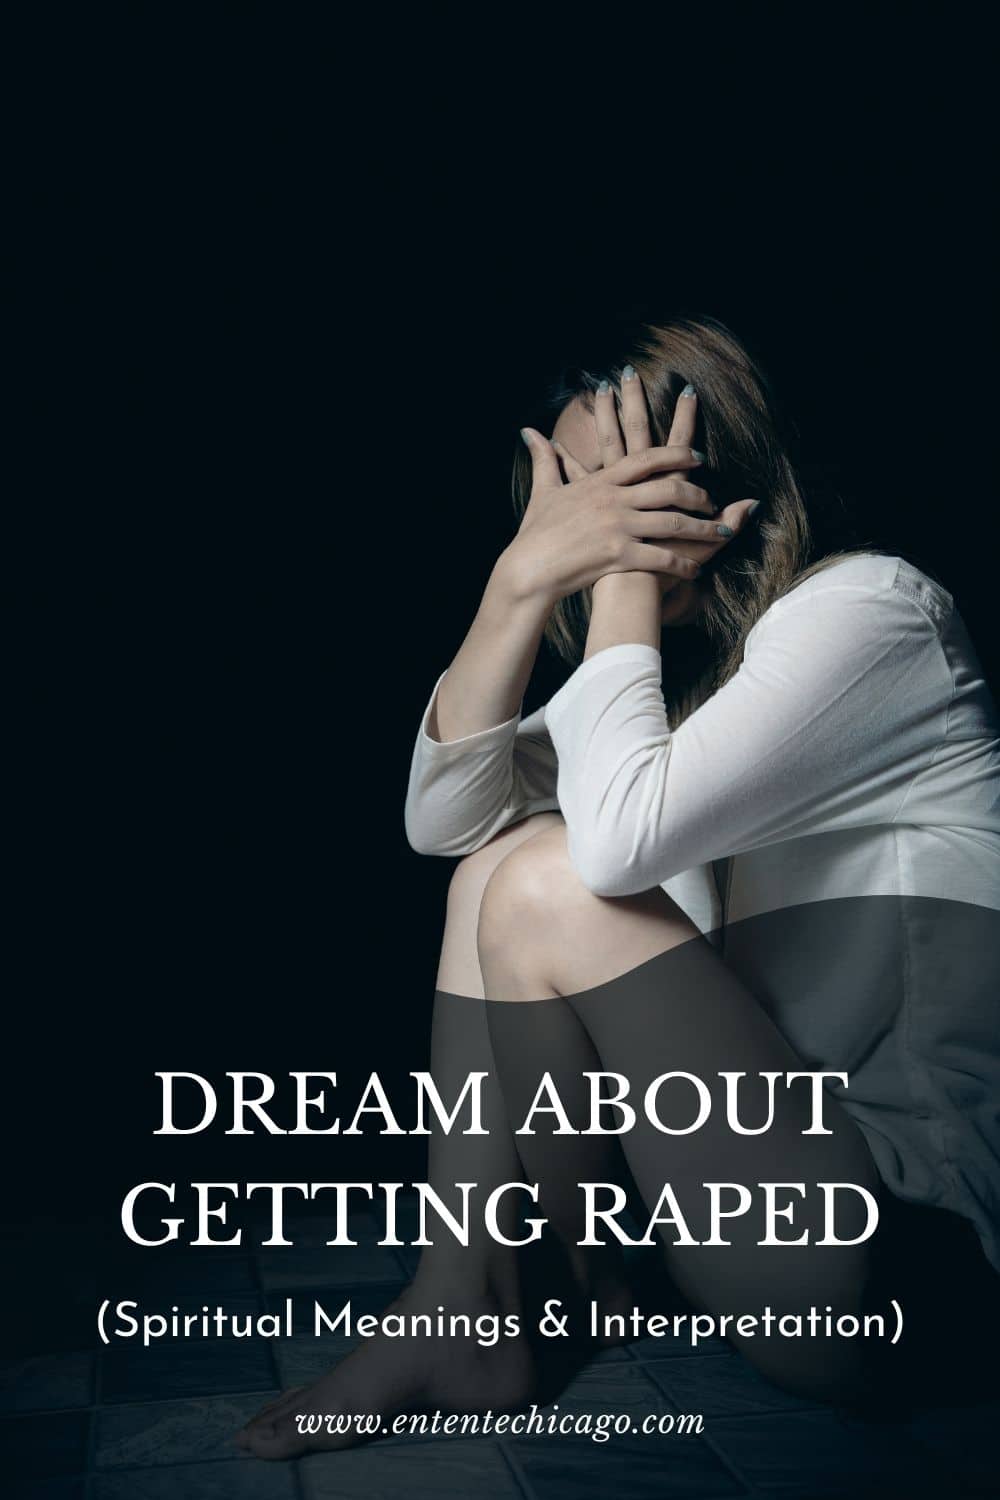 Dream about getting raped meanings